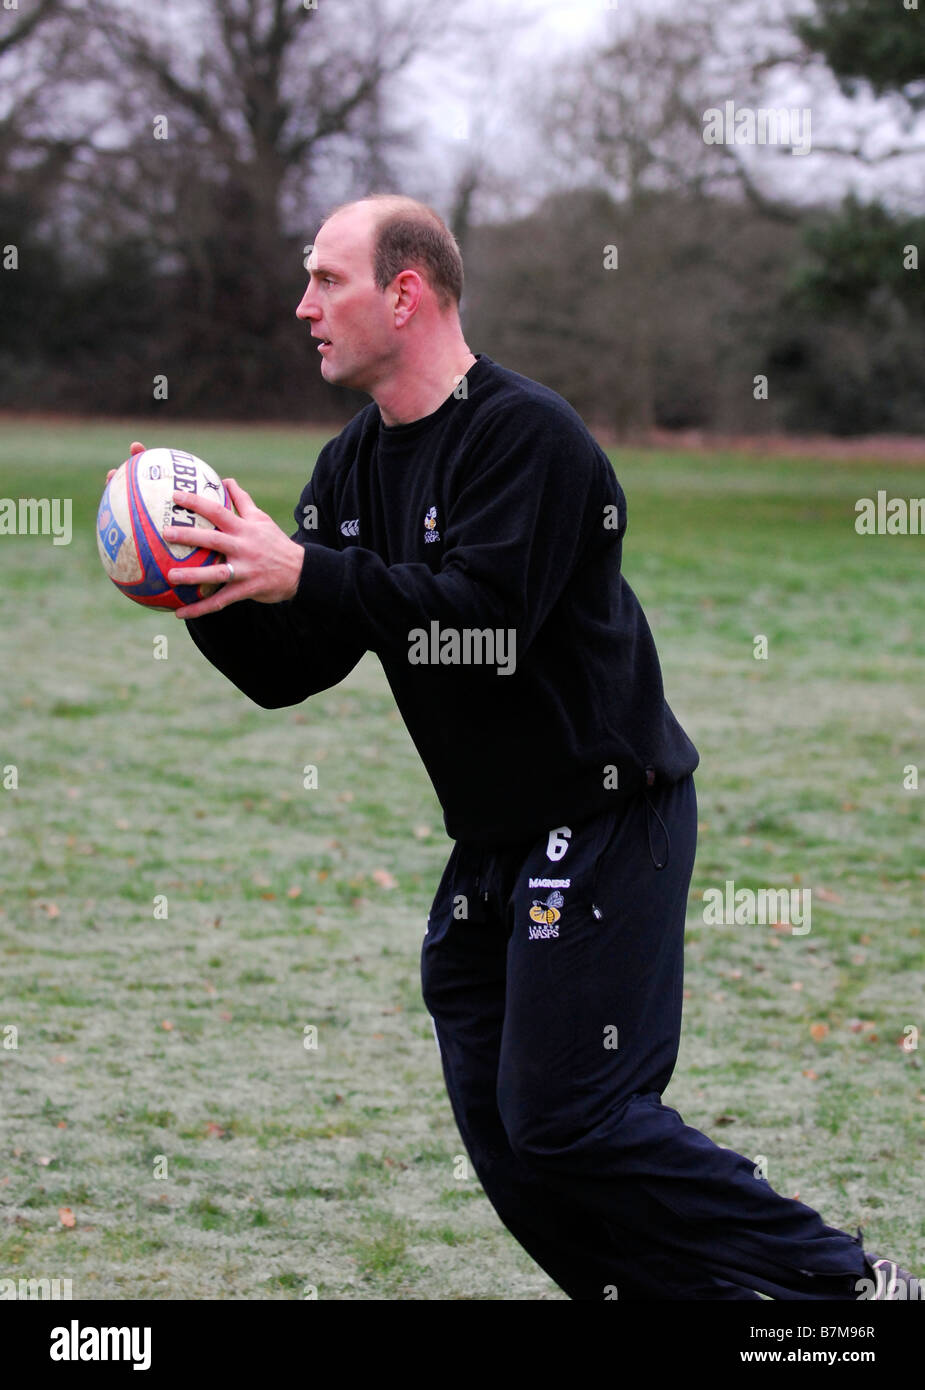 Former Wasps and England rugby star Lawrence Dallaglio at a training session in Buckinghamshire UK Stock Photo